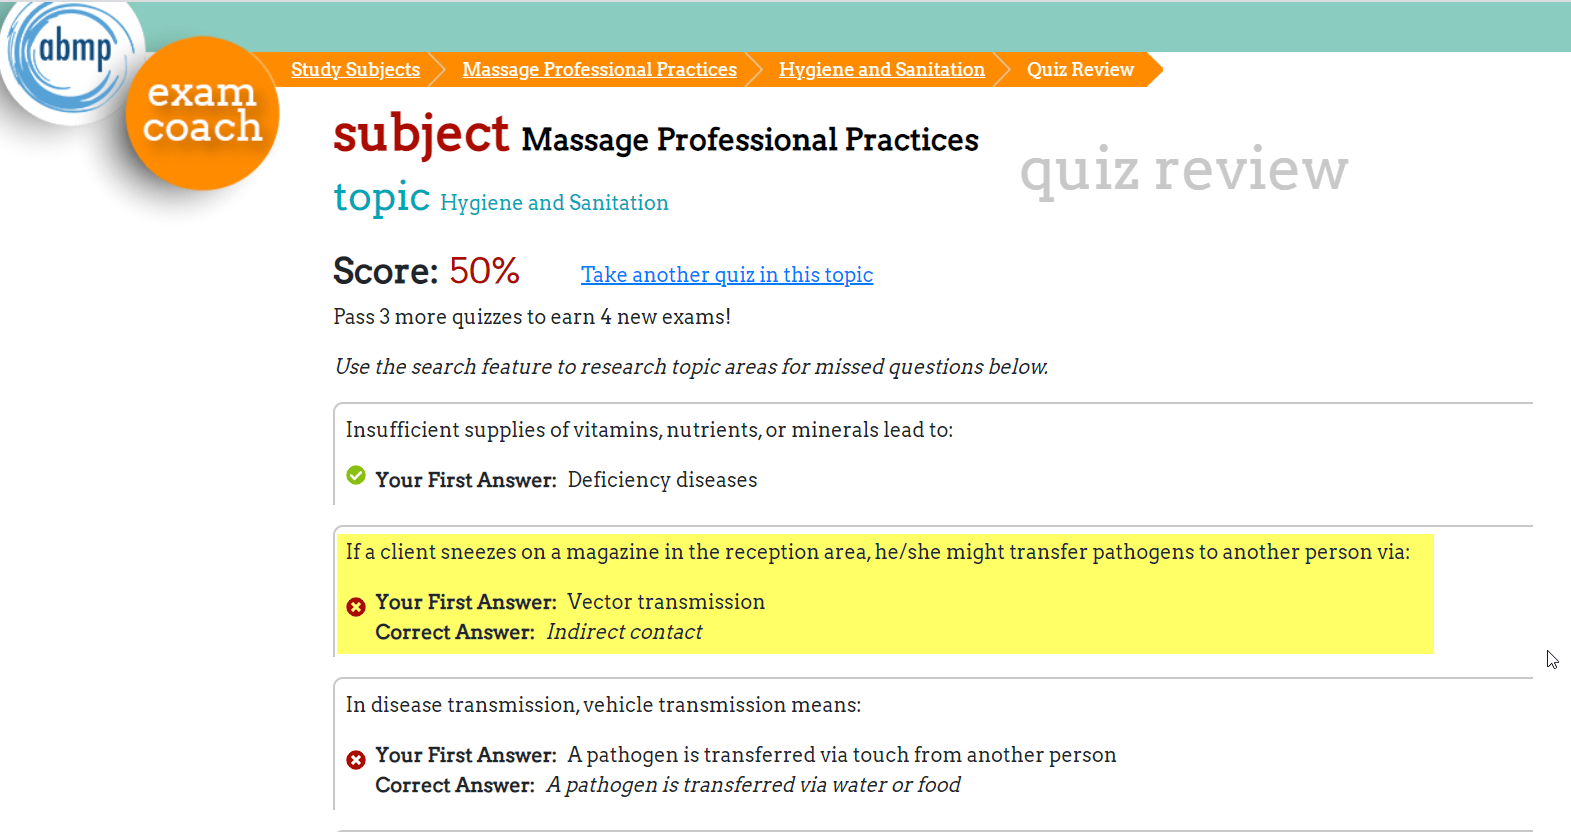 ABMP Exam Coach quiz summary page showing correct answers to quiz questions about Hygiene and Sanitation. 